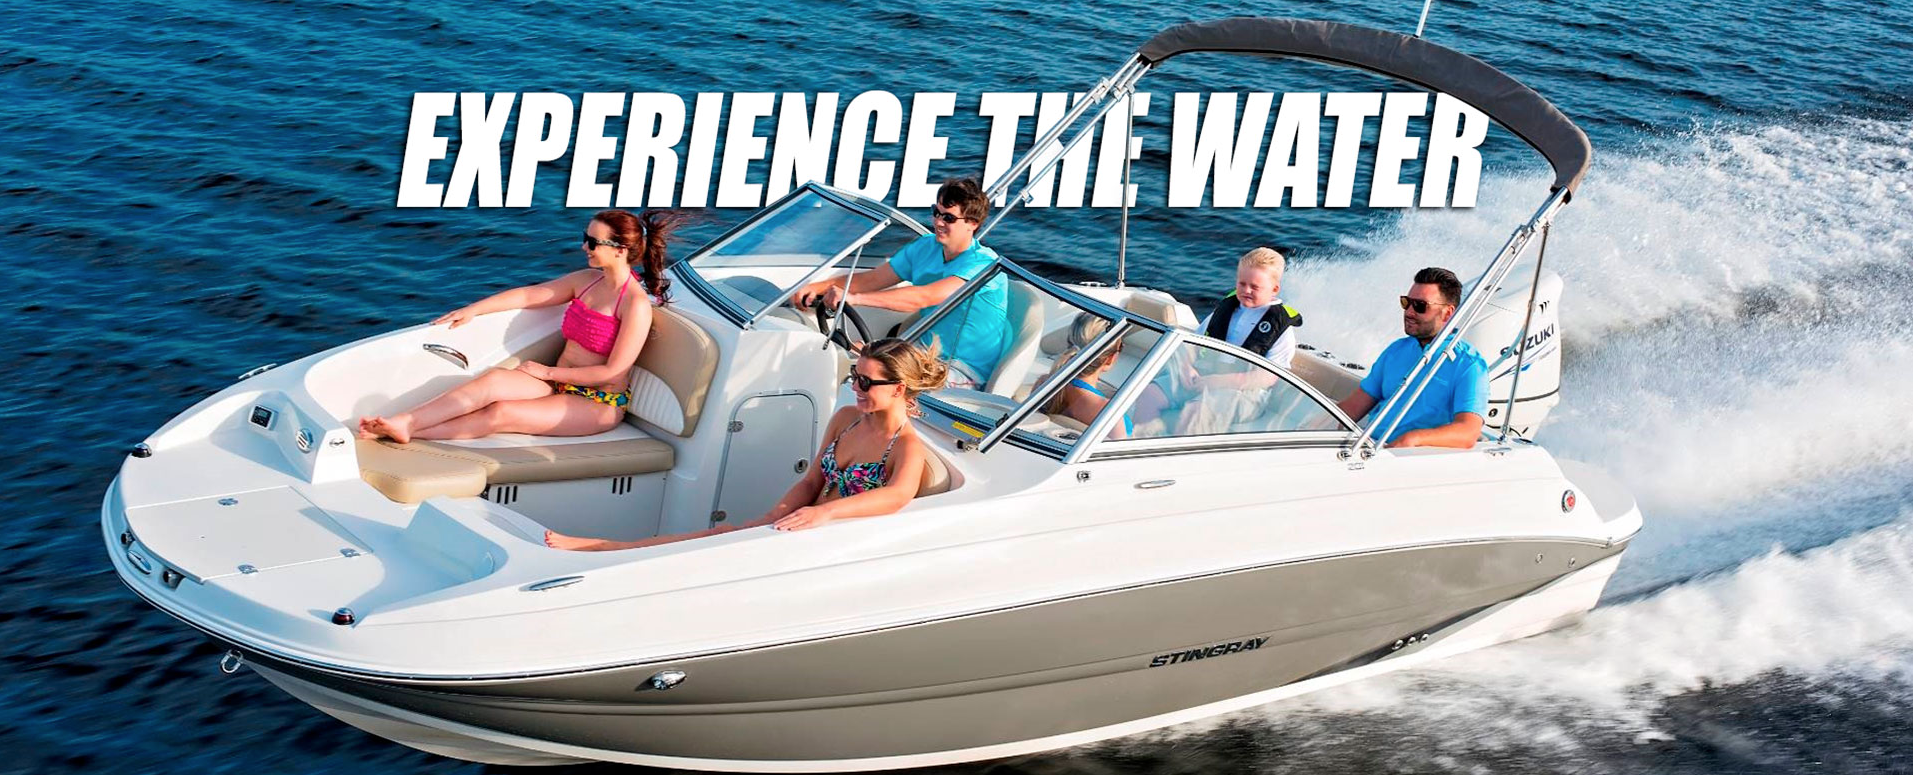 Experience The Water At Jacksonville Marine. Your Local Boat Dealer In Fleming Island Florida.